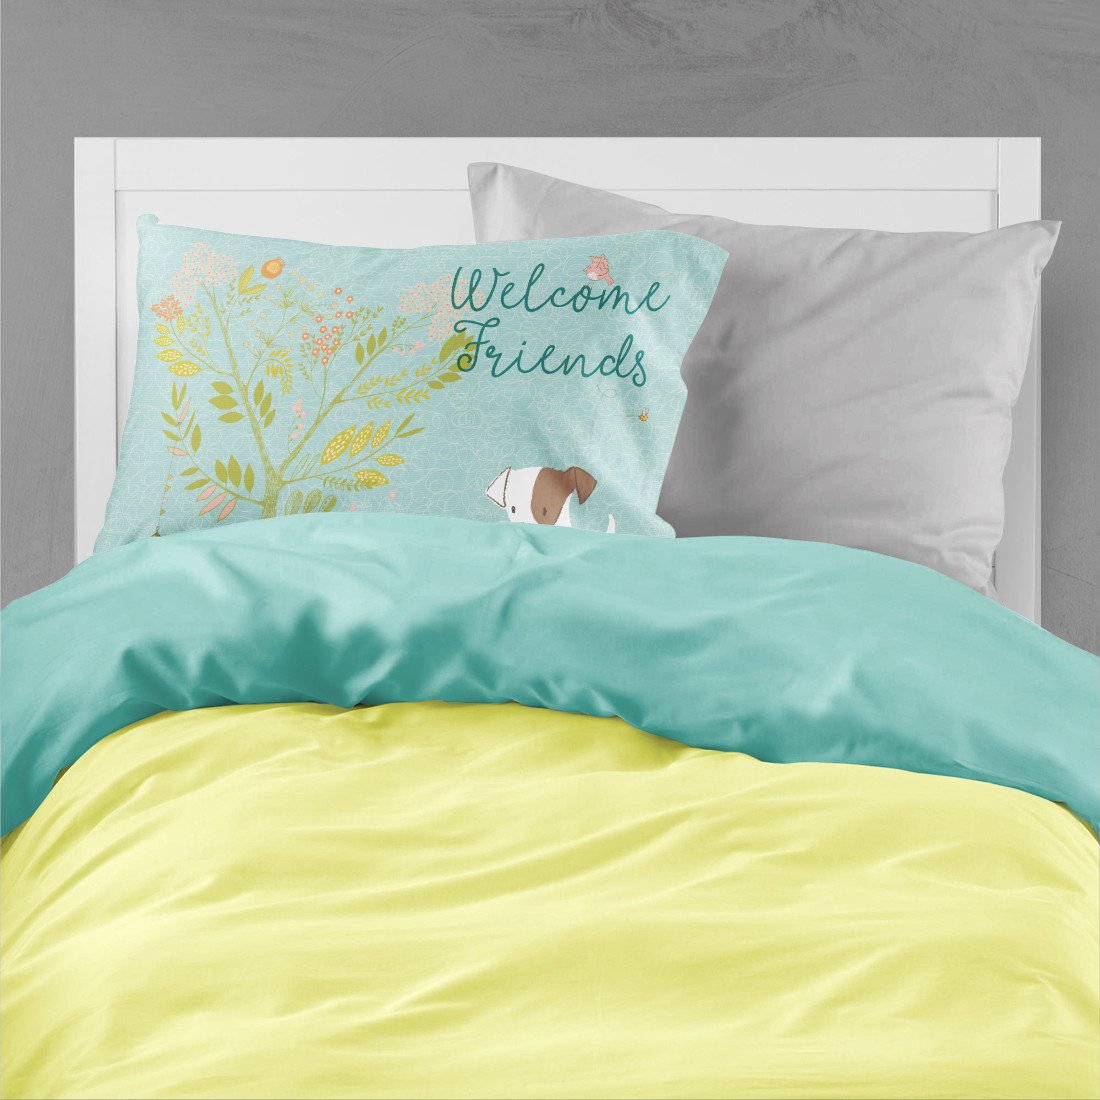 Welcome Friends Jack Russell Terrier Puppy Fabric Standard Pillowcase BB7637PILLOWCASE by Caroline's Treasures